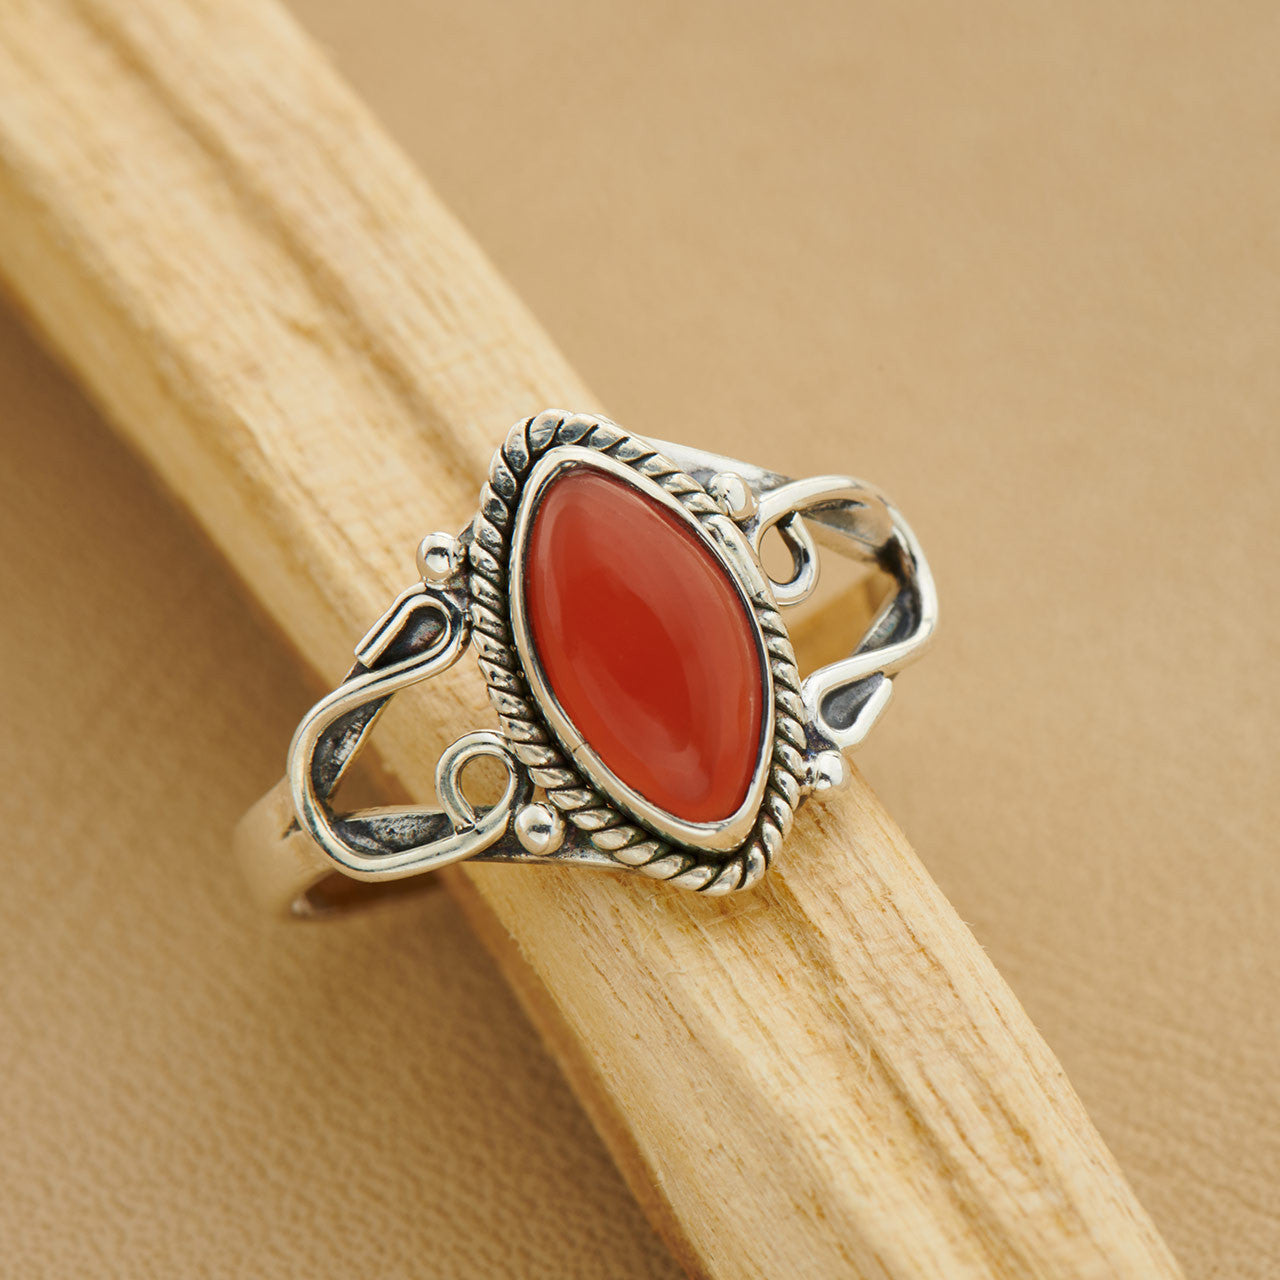 Carnelian is known as a stone of motivation and endurance, leadership and courage. Carnelians have protected and inspired throughout history. A glassy, translucent stone, Carnelian is an orange-colored variety if Chalcedony, a mineral of the Quartz family. 